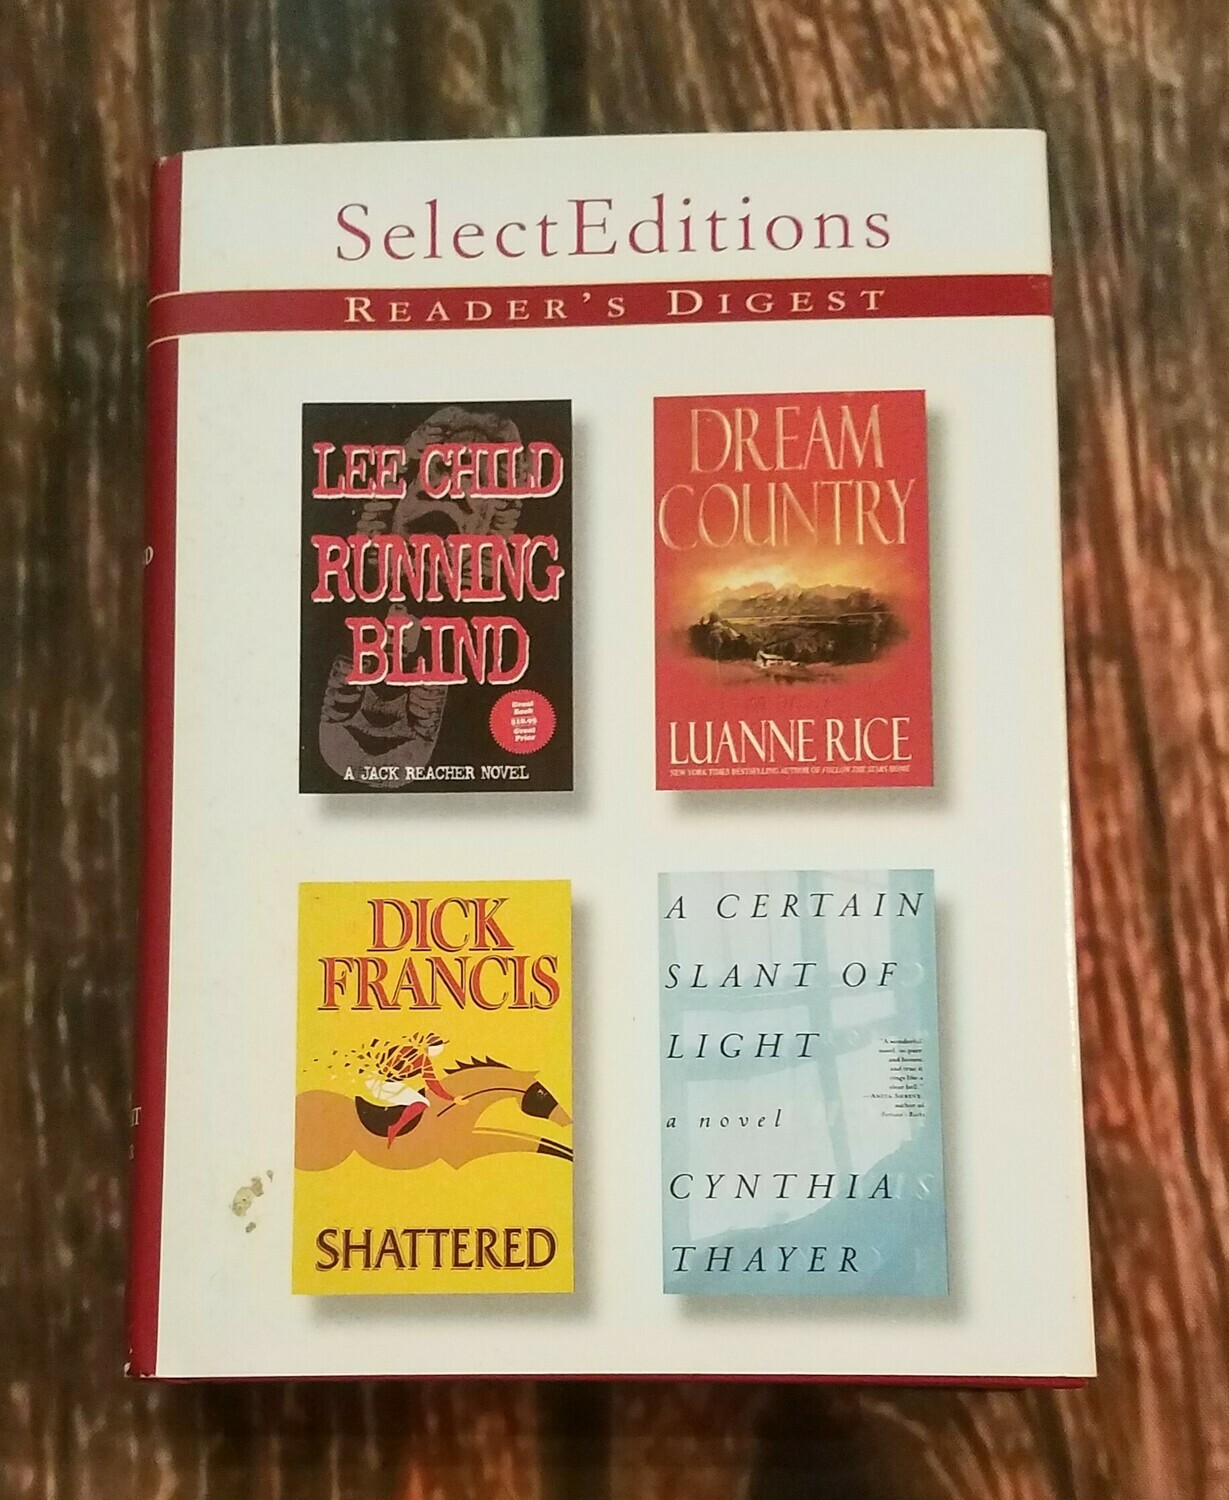 Running Blind, Dream Country, Shattered, and A Certain Slant of Light by Reader's Digest